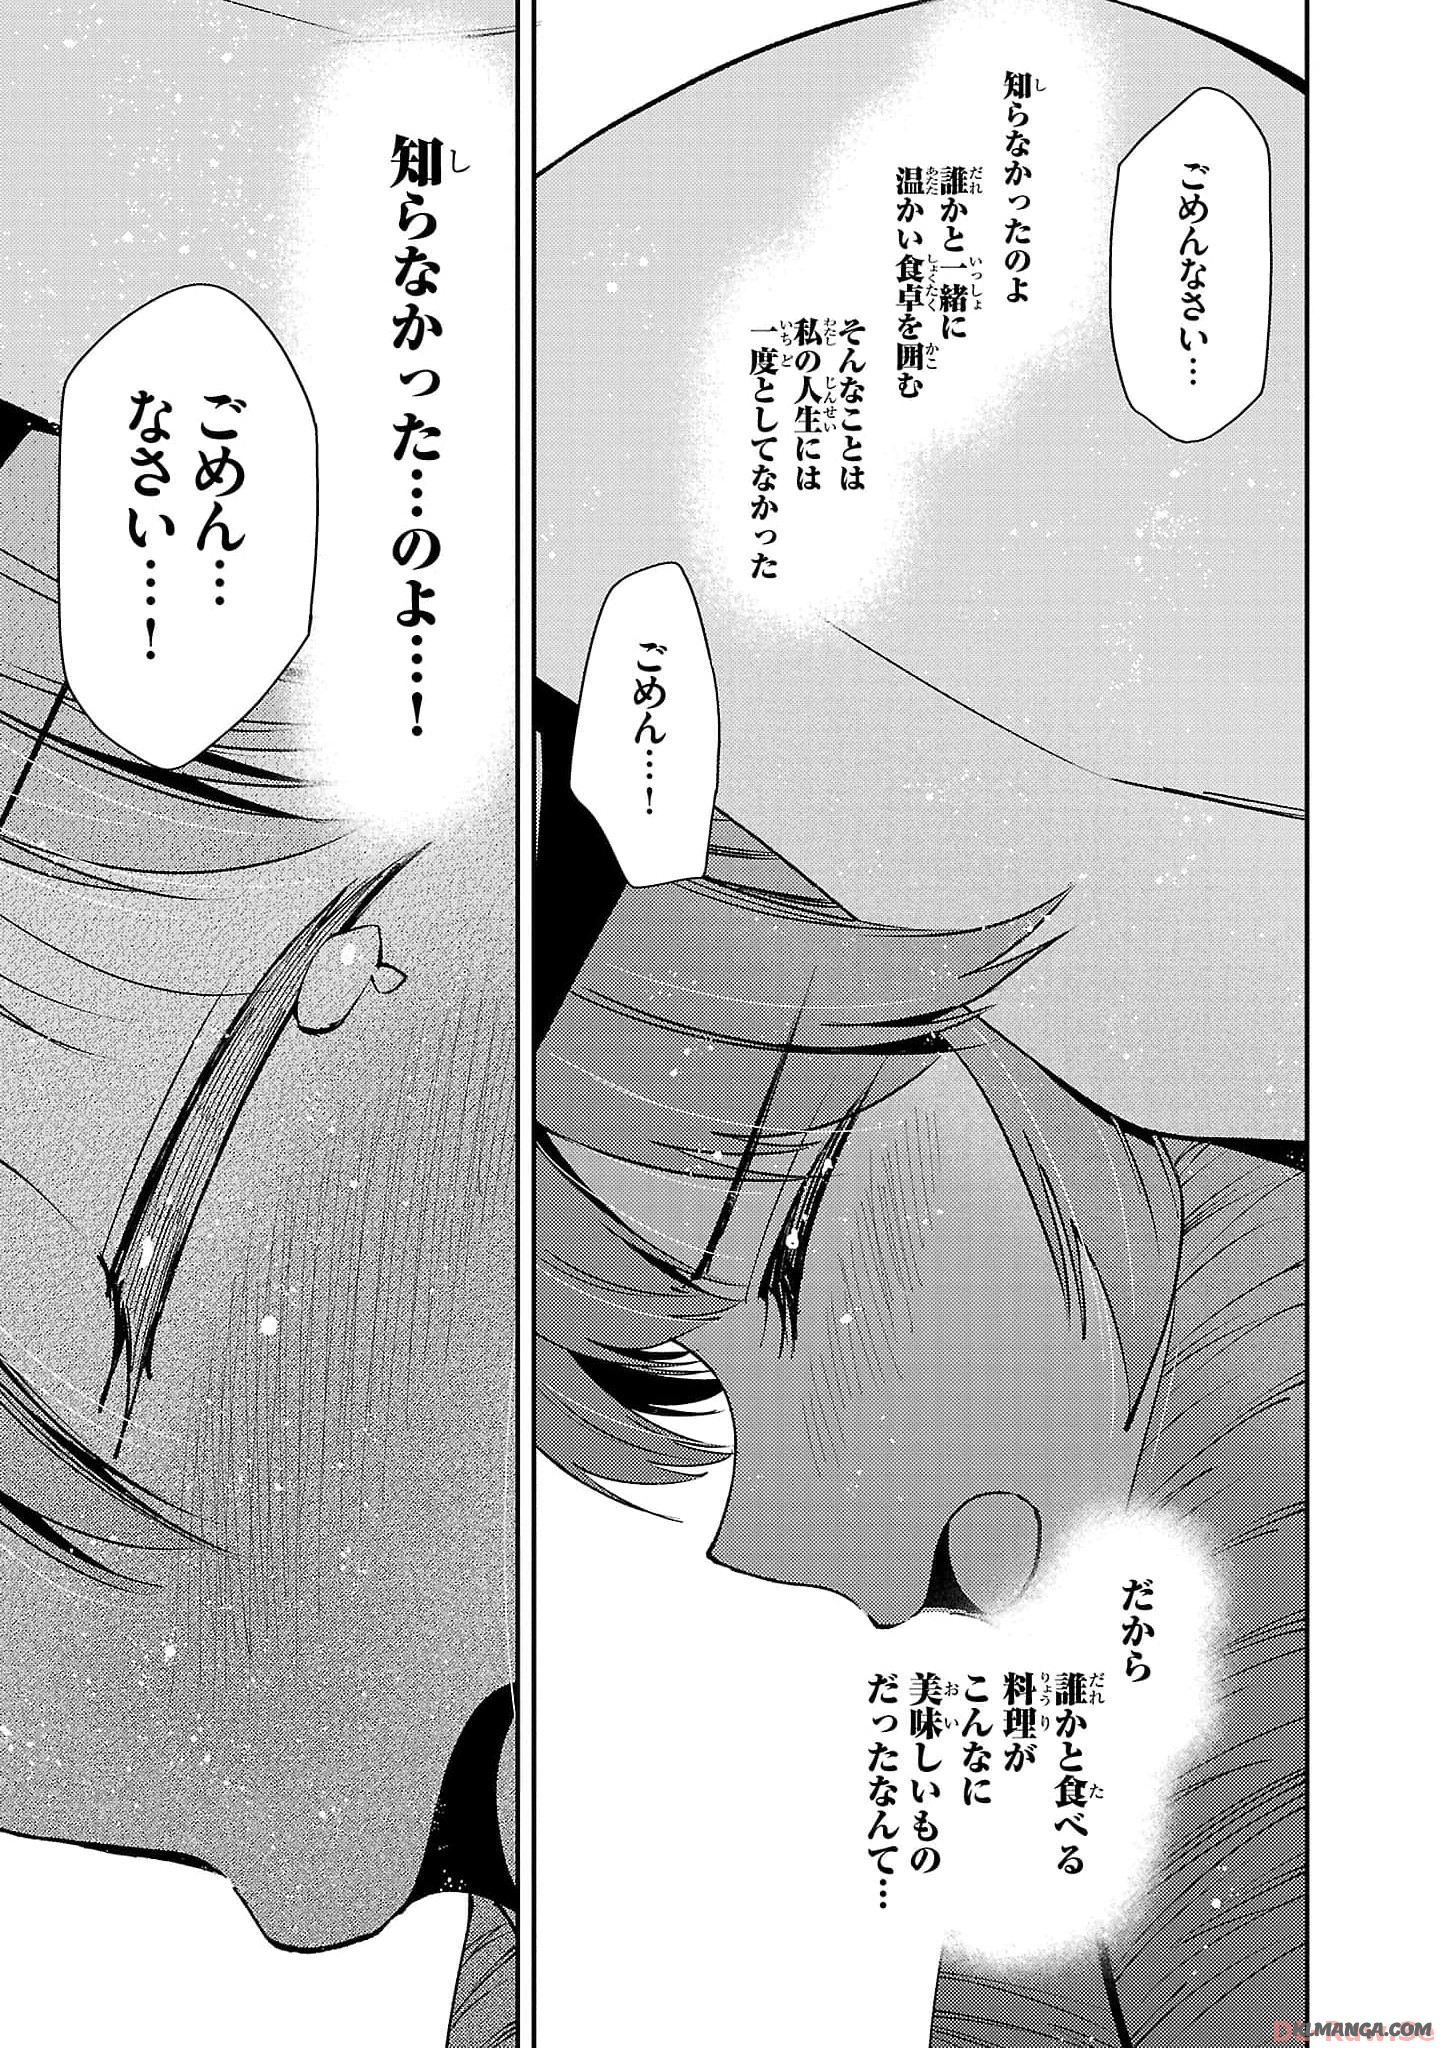 Hungry Saint and Full-Stomach Witch’s Slow Life in Another World! 腹ペコ聖女とまんぷく魔女の異世界スローライフ! 第22話 - Page 23